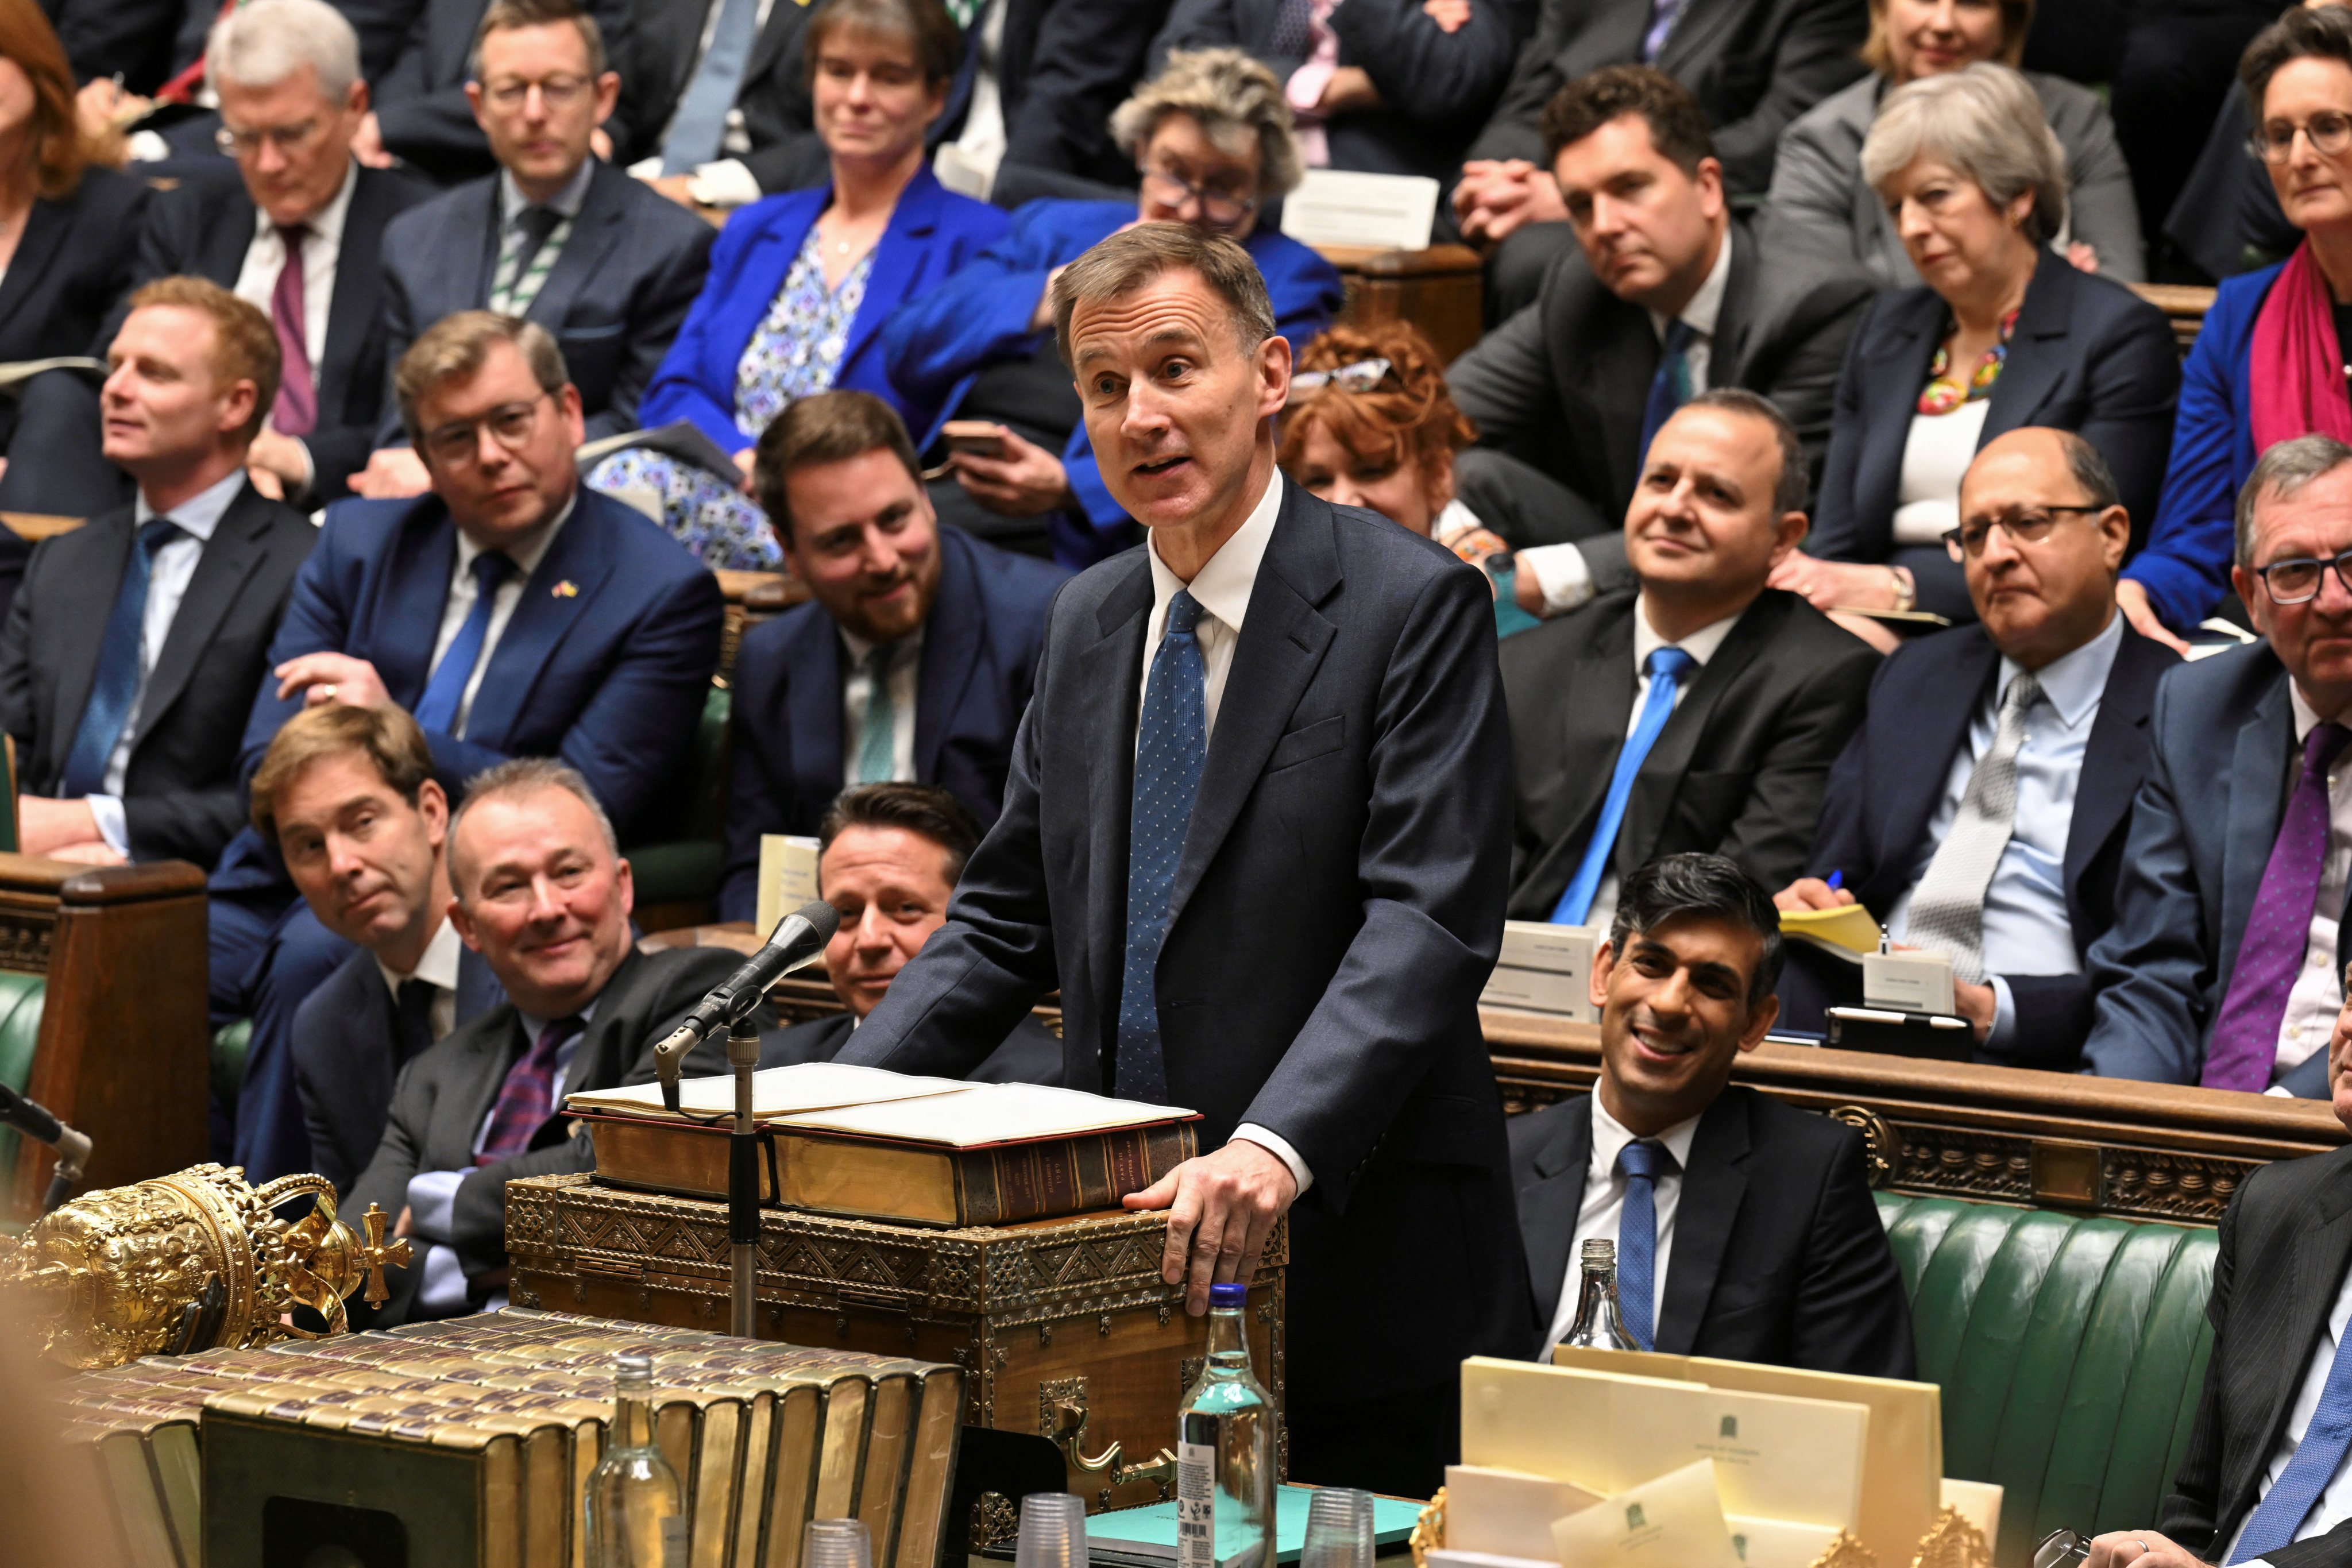 Britain’s Chancellor of the Exchequer Jeremy Hunt gives his Autumn Statement at the House of Commons in London on Wednesday. Photo: UK Parliament via Reuters